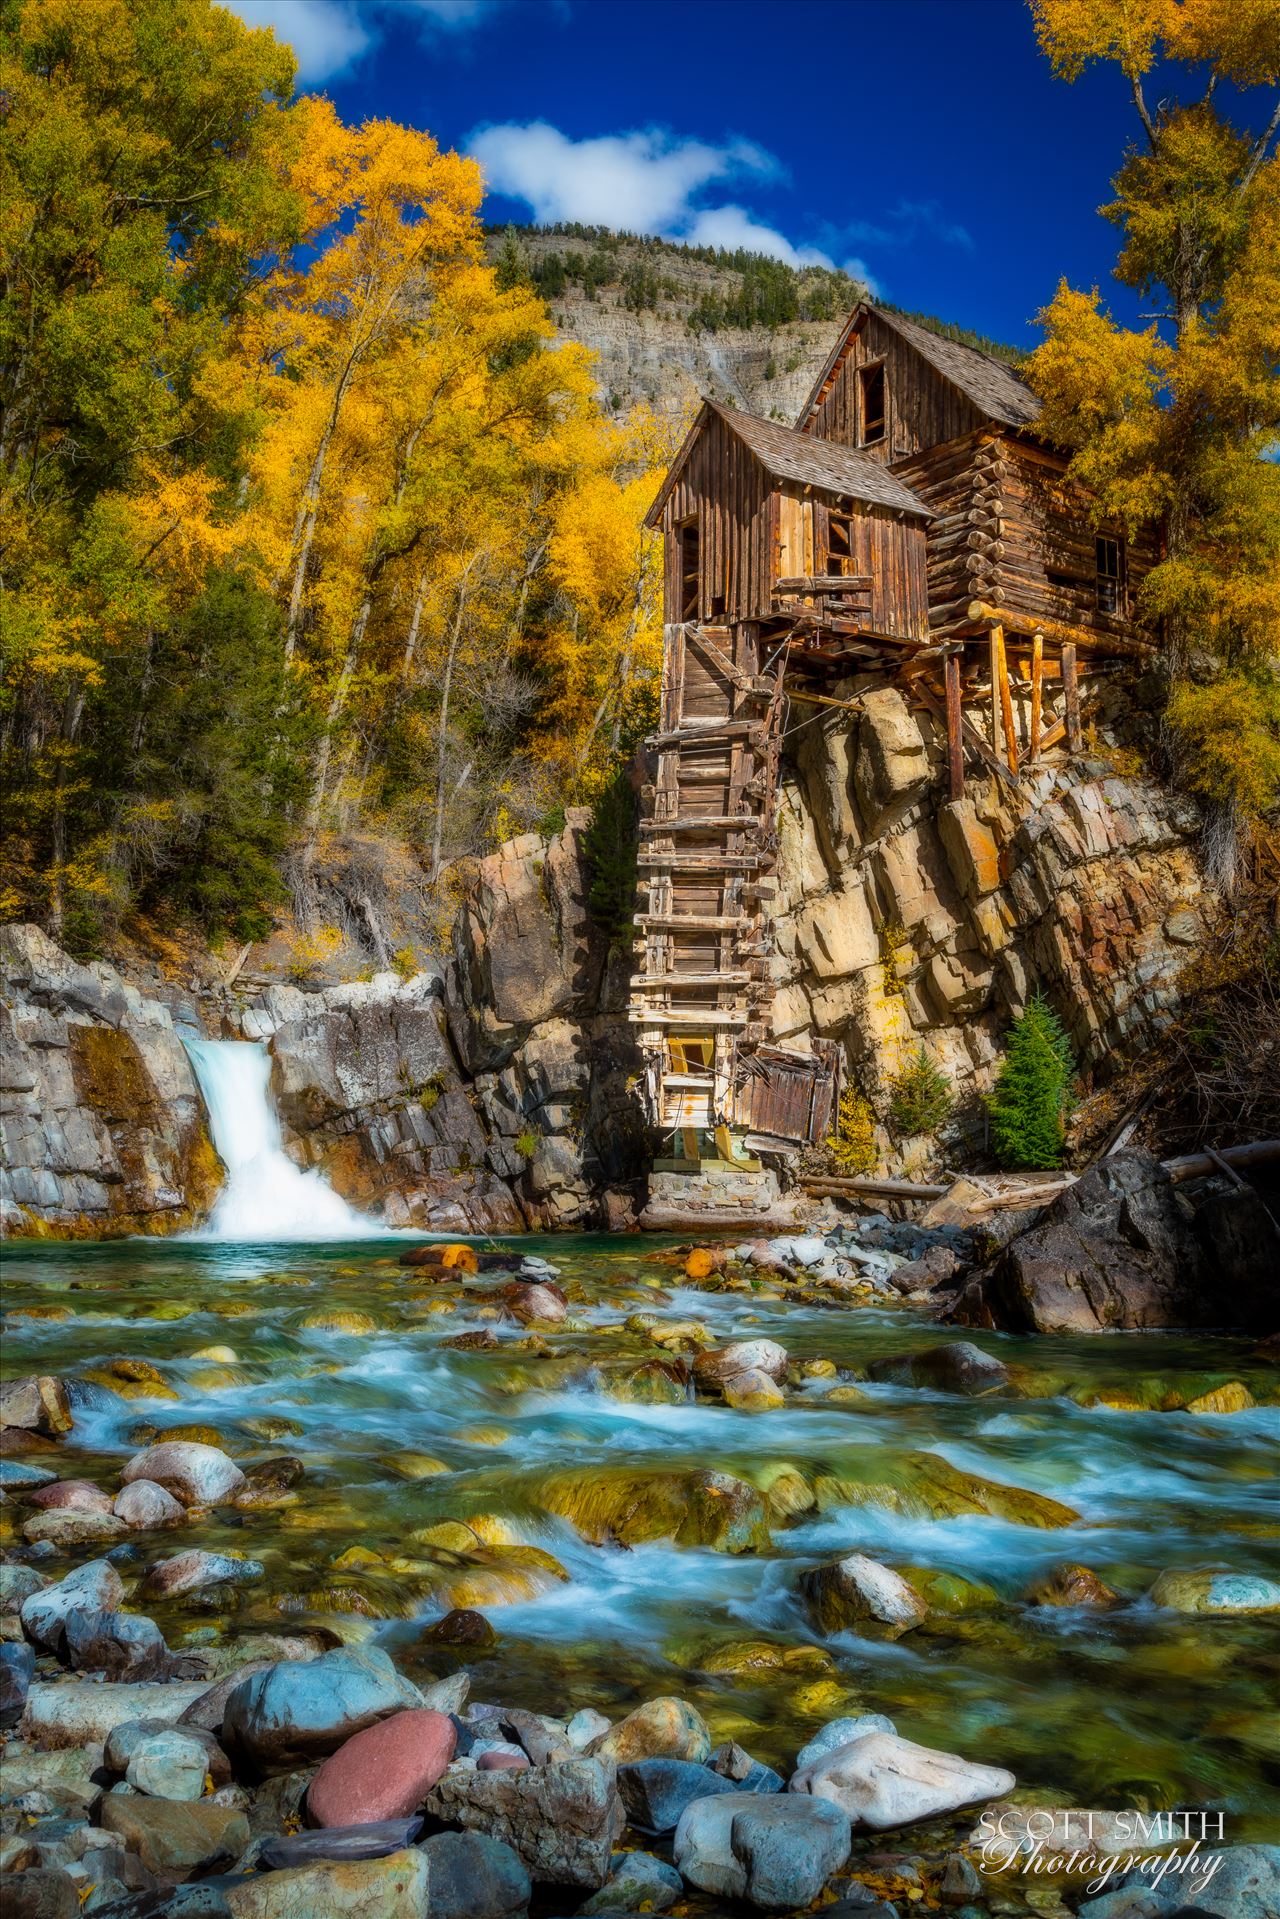 Crystal Mill, Colorado 11 - The Crystal Mill, or the Old Mill is an 1892 wooden powerhouse located on an outcrop above the Crystal River in Crystal, Colorado by Scott Smith Photos